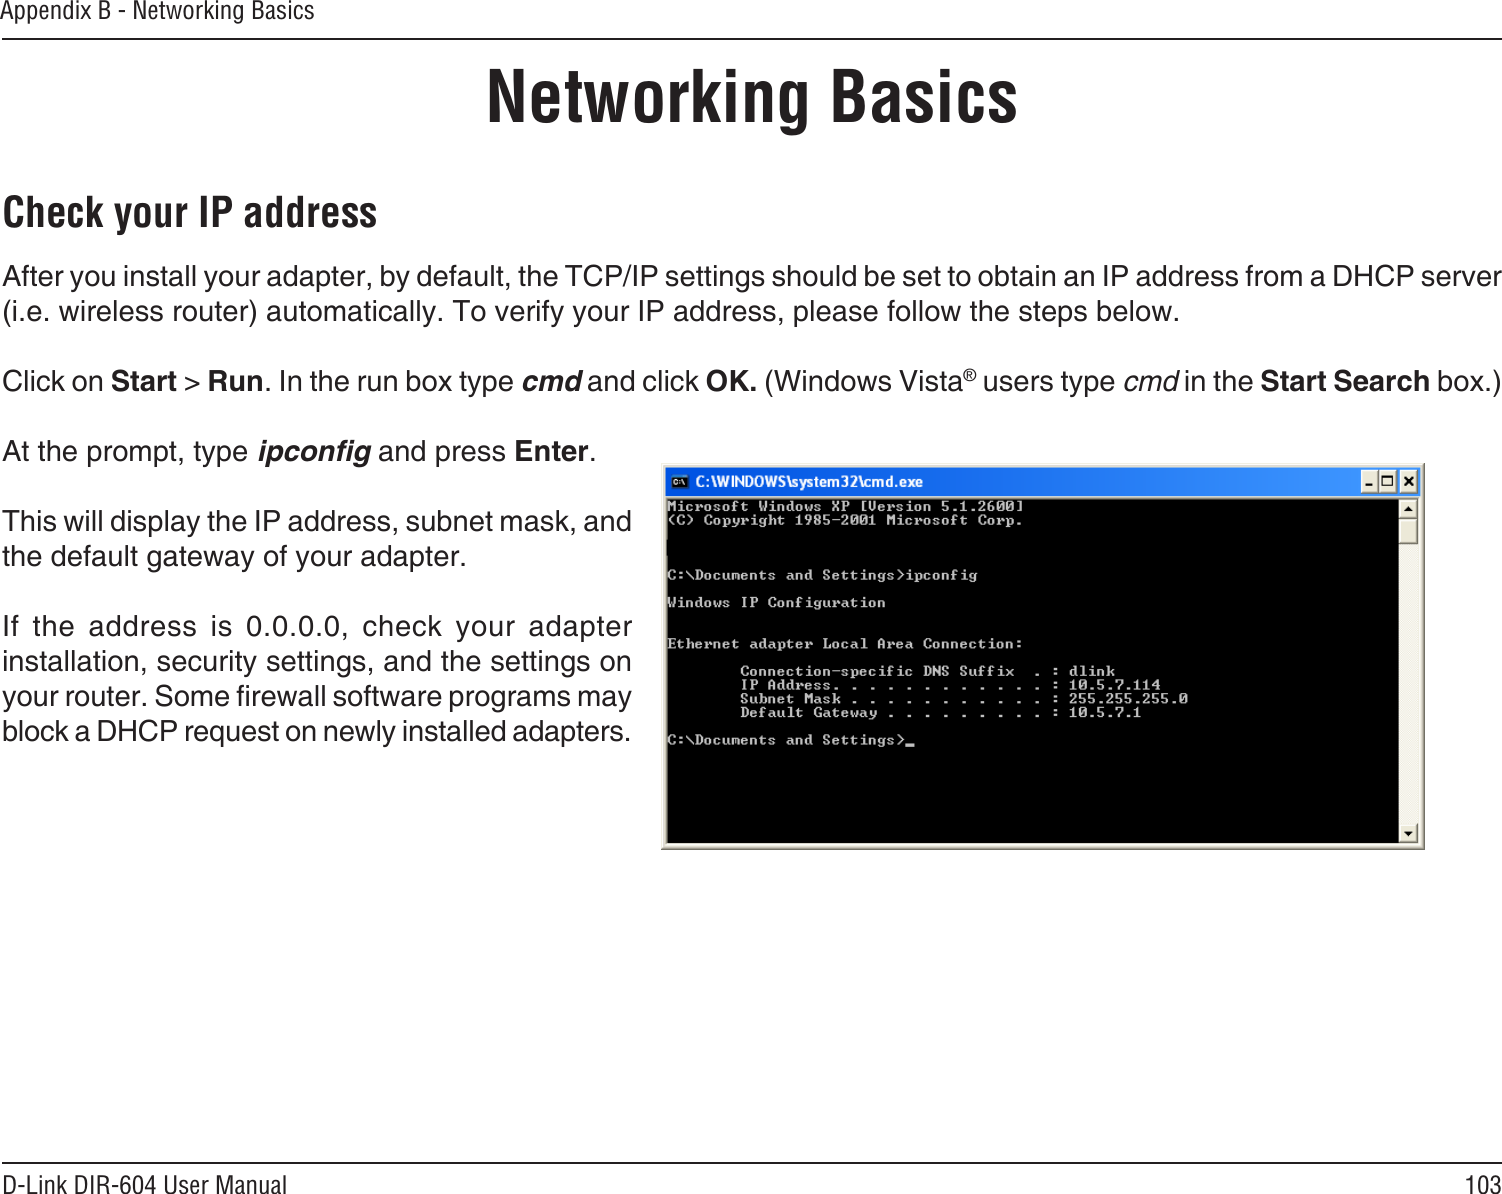 103D-Link DIR-604 User ManualAppendix B - Networking BasicsNetworking BasicsCheck your IP addressAfter you install your adapter, by default, the TCP/IP settings should be set to obtain an IP address from a DHCP server (i.e. wireless router) automatically. To verify your IP address, please follow the steps below.Click on Start &gt; Run. In the run box type cmd and click OK. (Windows Vista® users type cmd in the Start Search box.)At the prompt, type ipconﬁg and press Enter.This will display the IP address, subnet mask, and the default gateway of your adapter.If  the  address  is  0.0.0.0,  check  your  adapter installation, security settings, and the settings on your router. Some rewall software programs may block a DHCP request on newly installed adapters. 